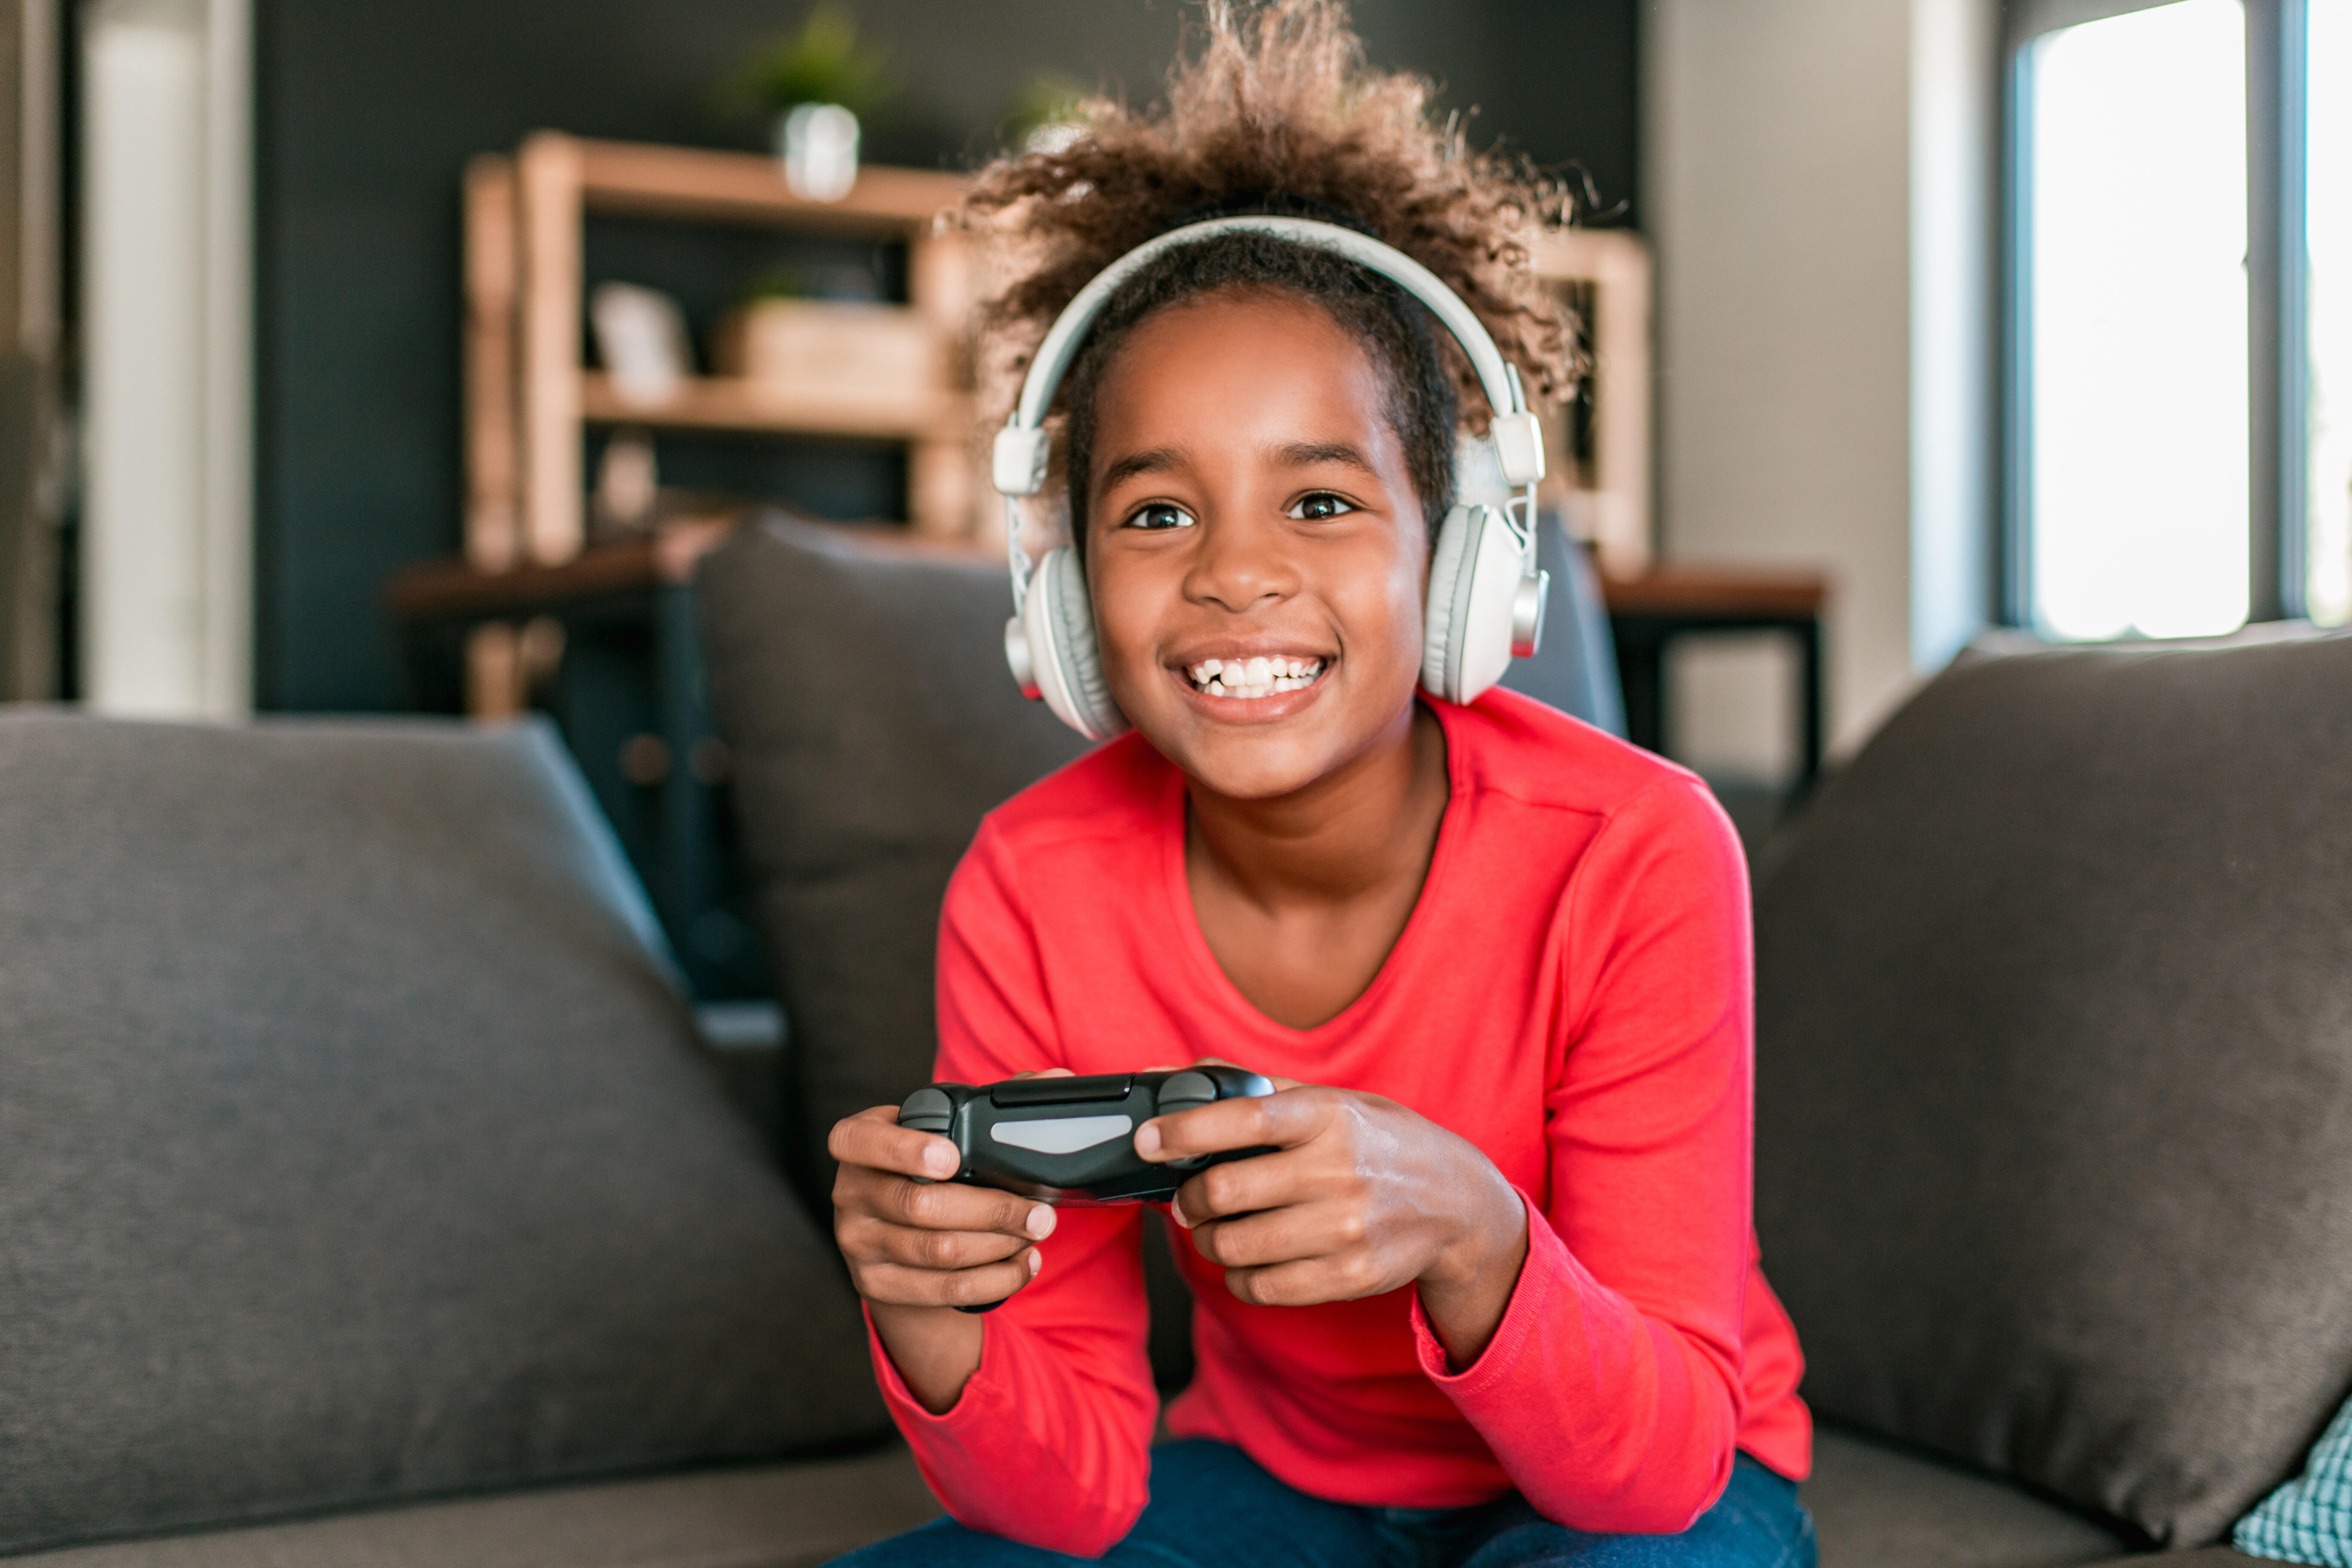 Why Are Kids Obsessed with Gaming rs? - Tinybeans